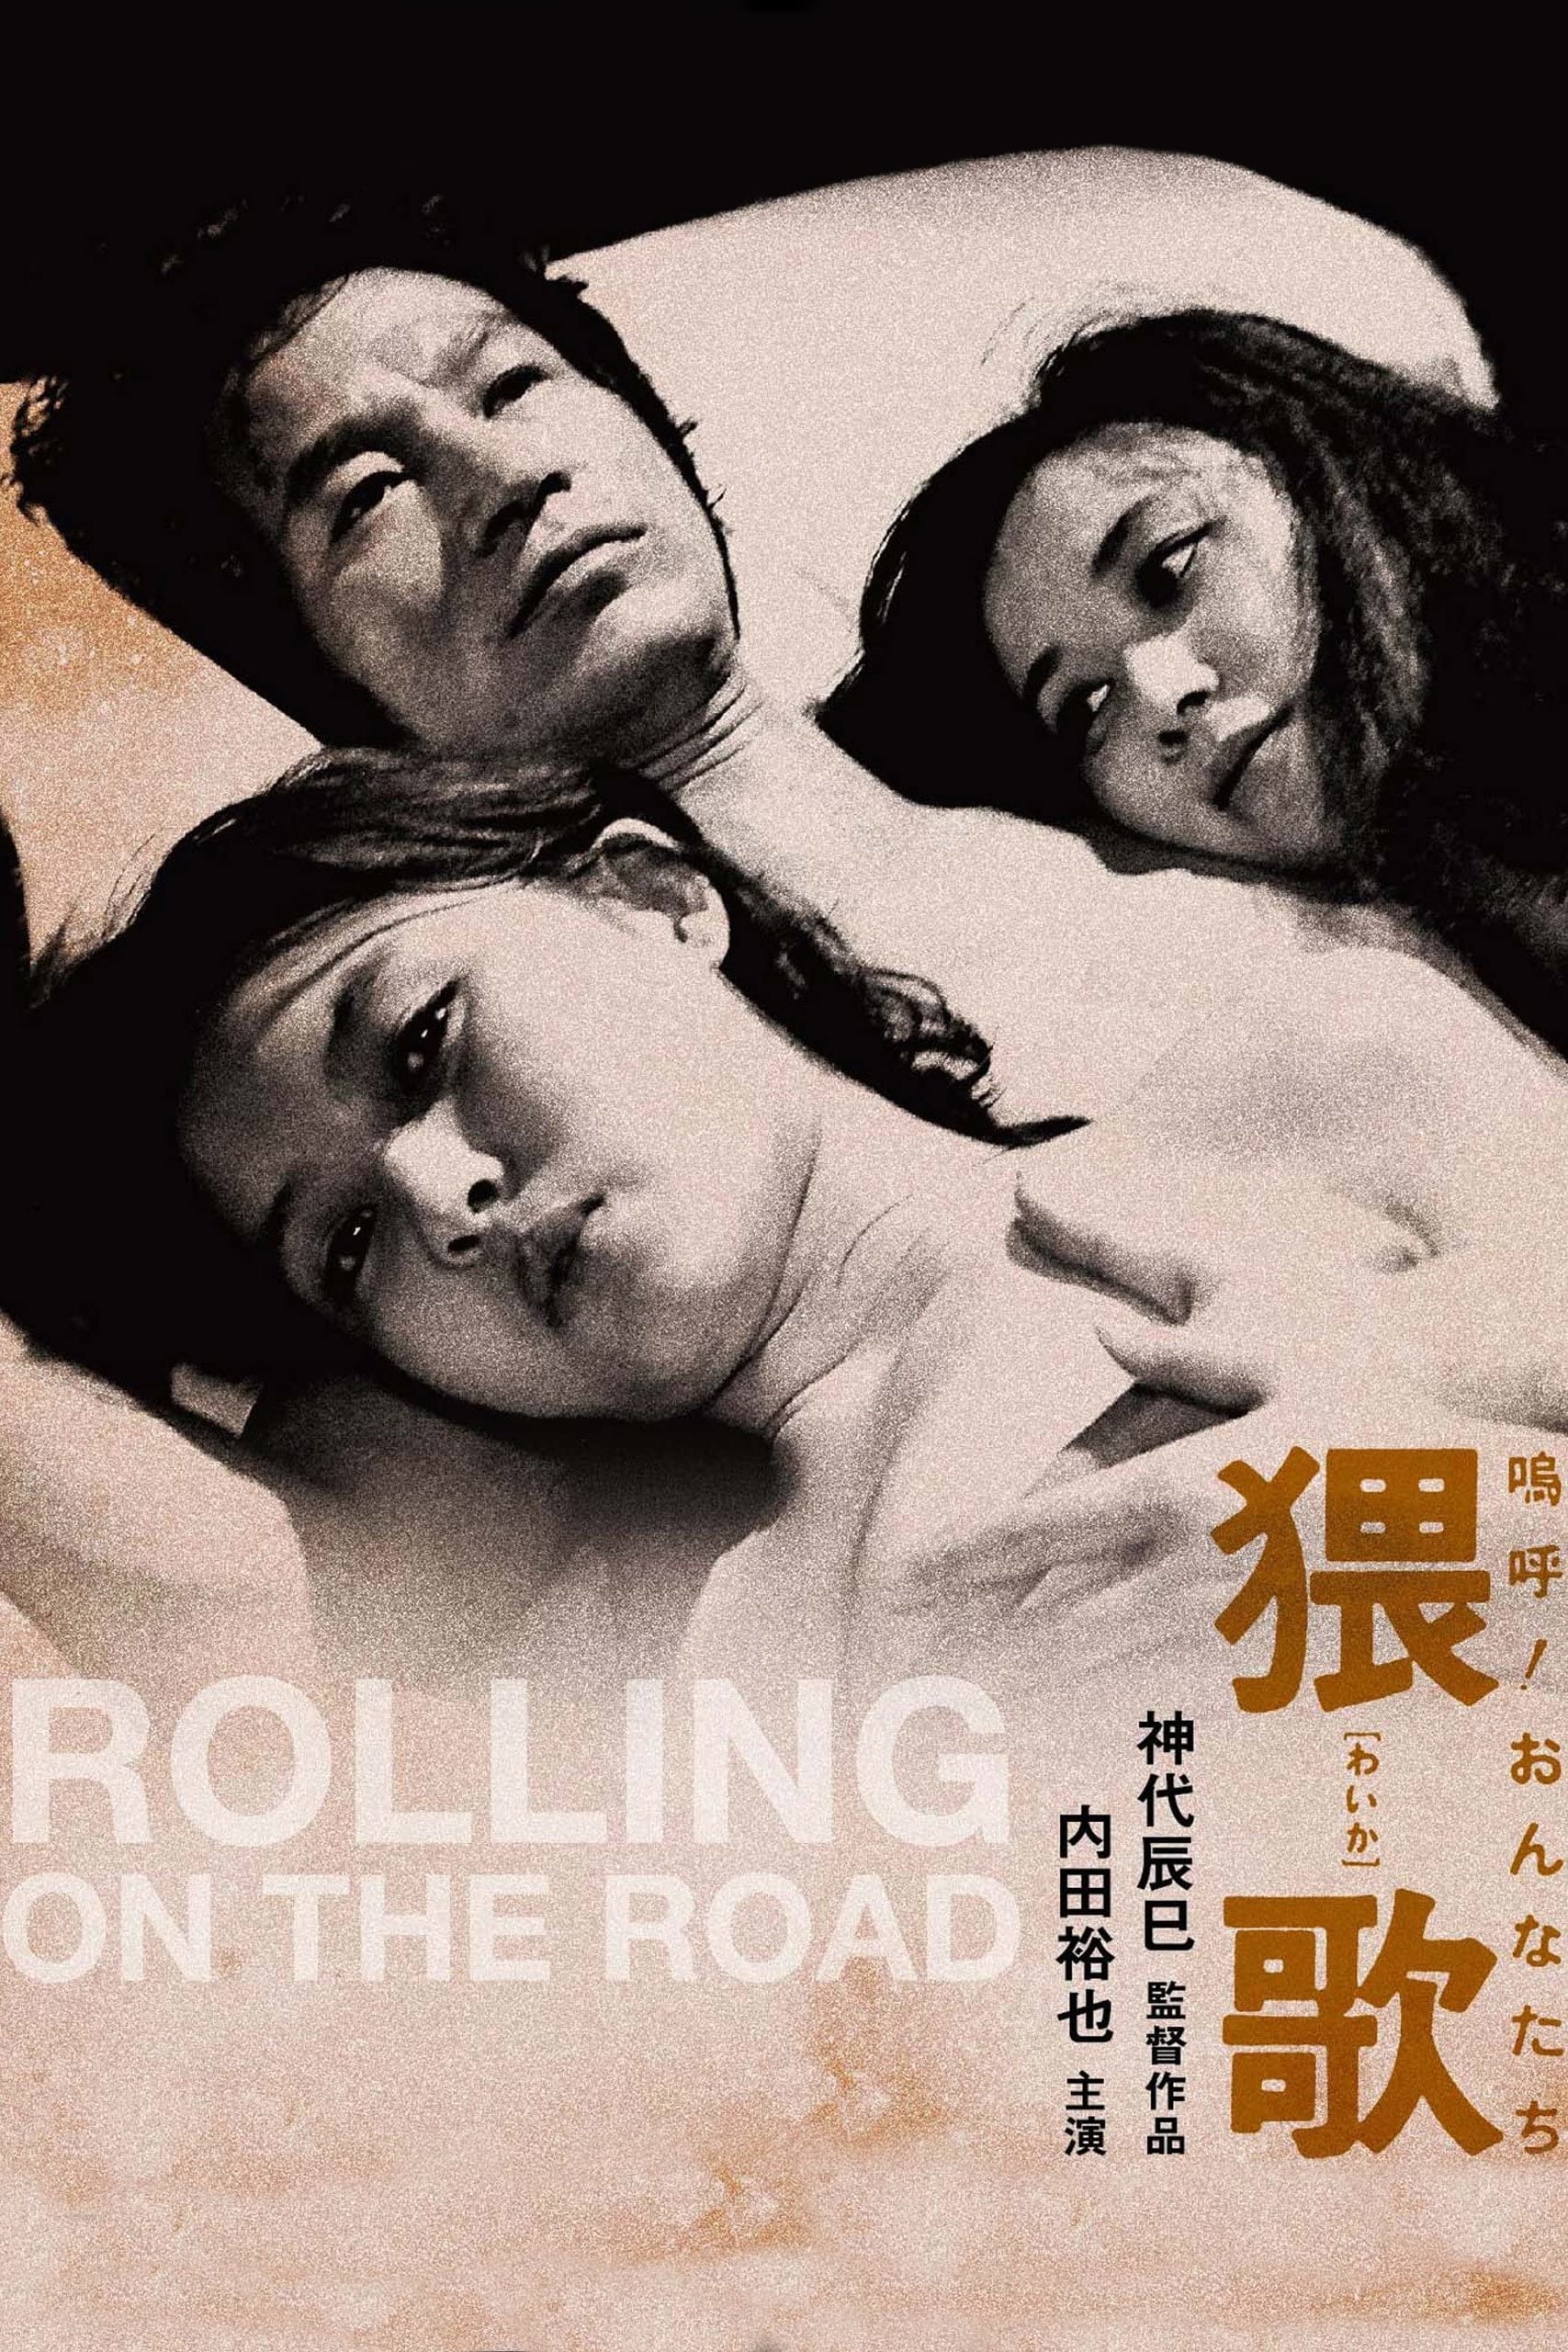 Rolling on the Road (1981)